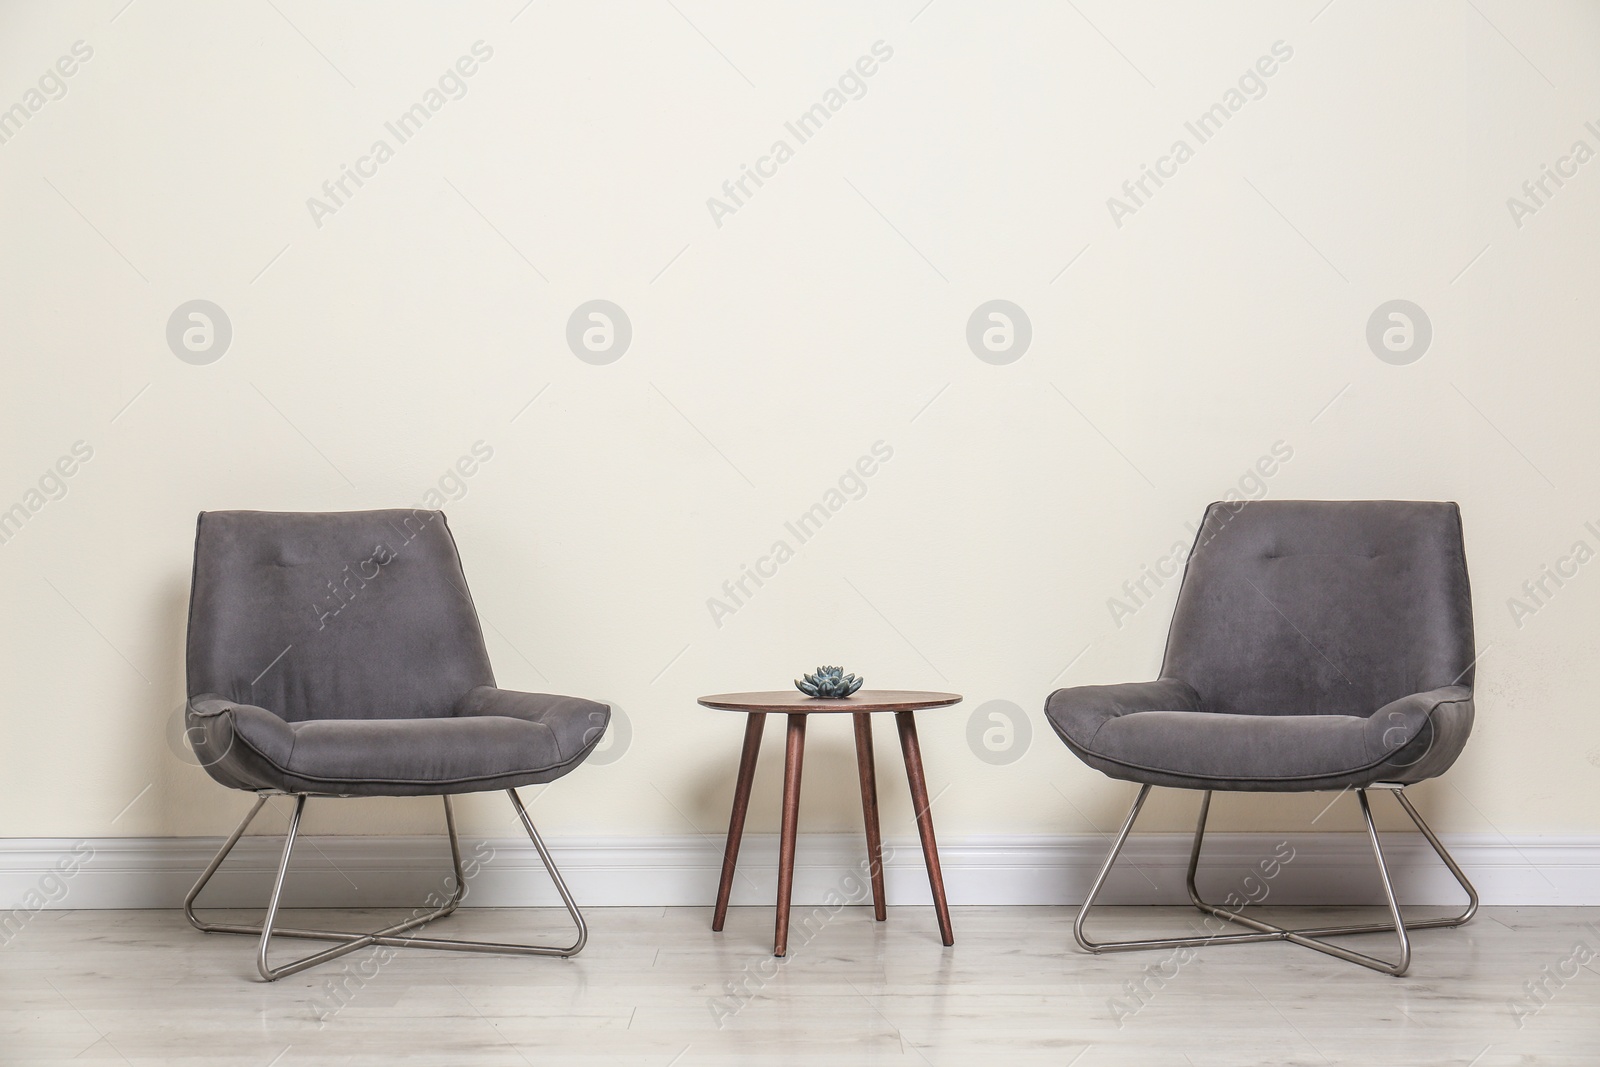 Photo of Room interior with modern chairs and table near light wall